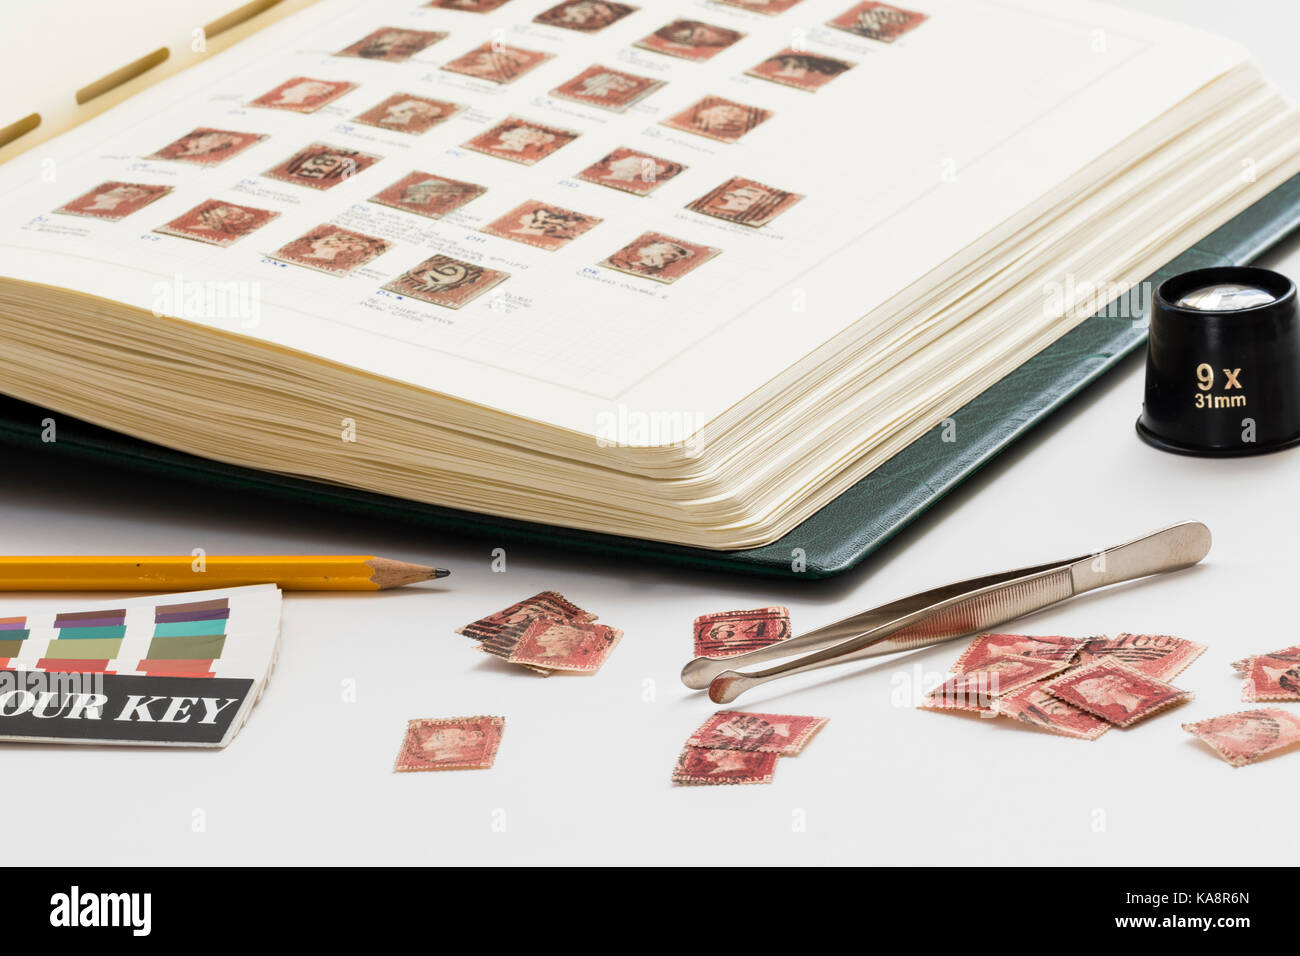 https://c8.alamy.com/comp/KA8R6N/england-victoria-penny-red-stamps-with-annotations-in-stamp-album-KA8R6N.jpg